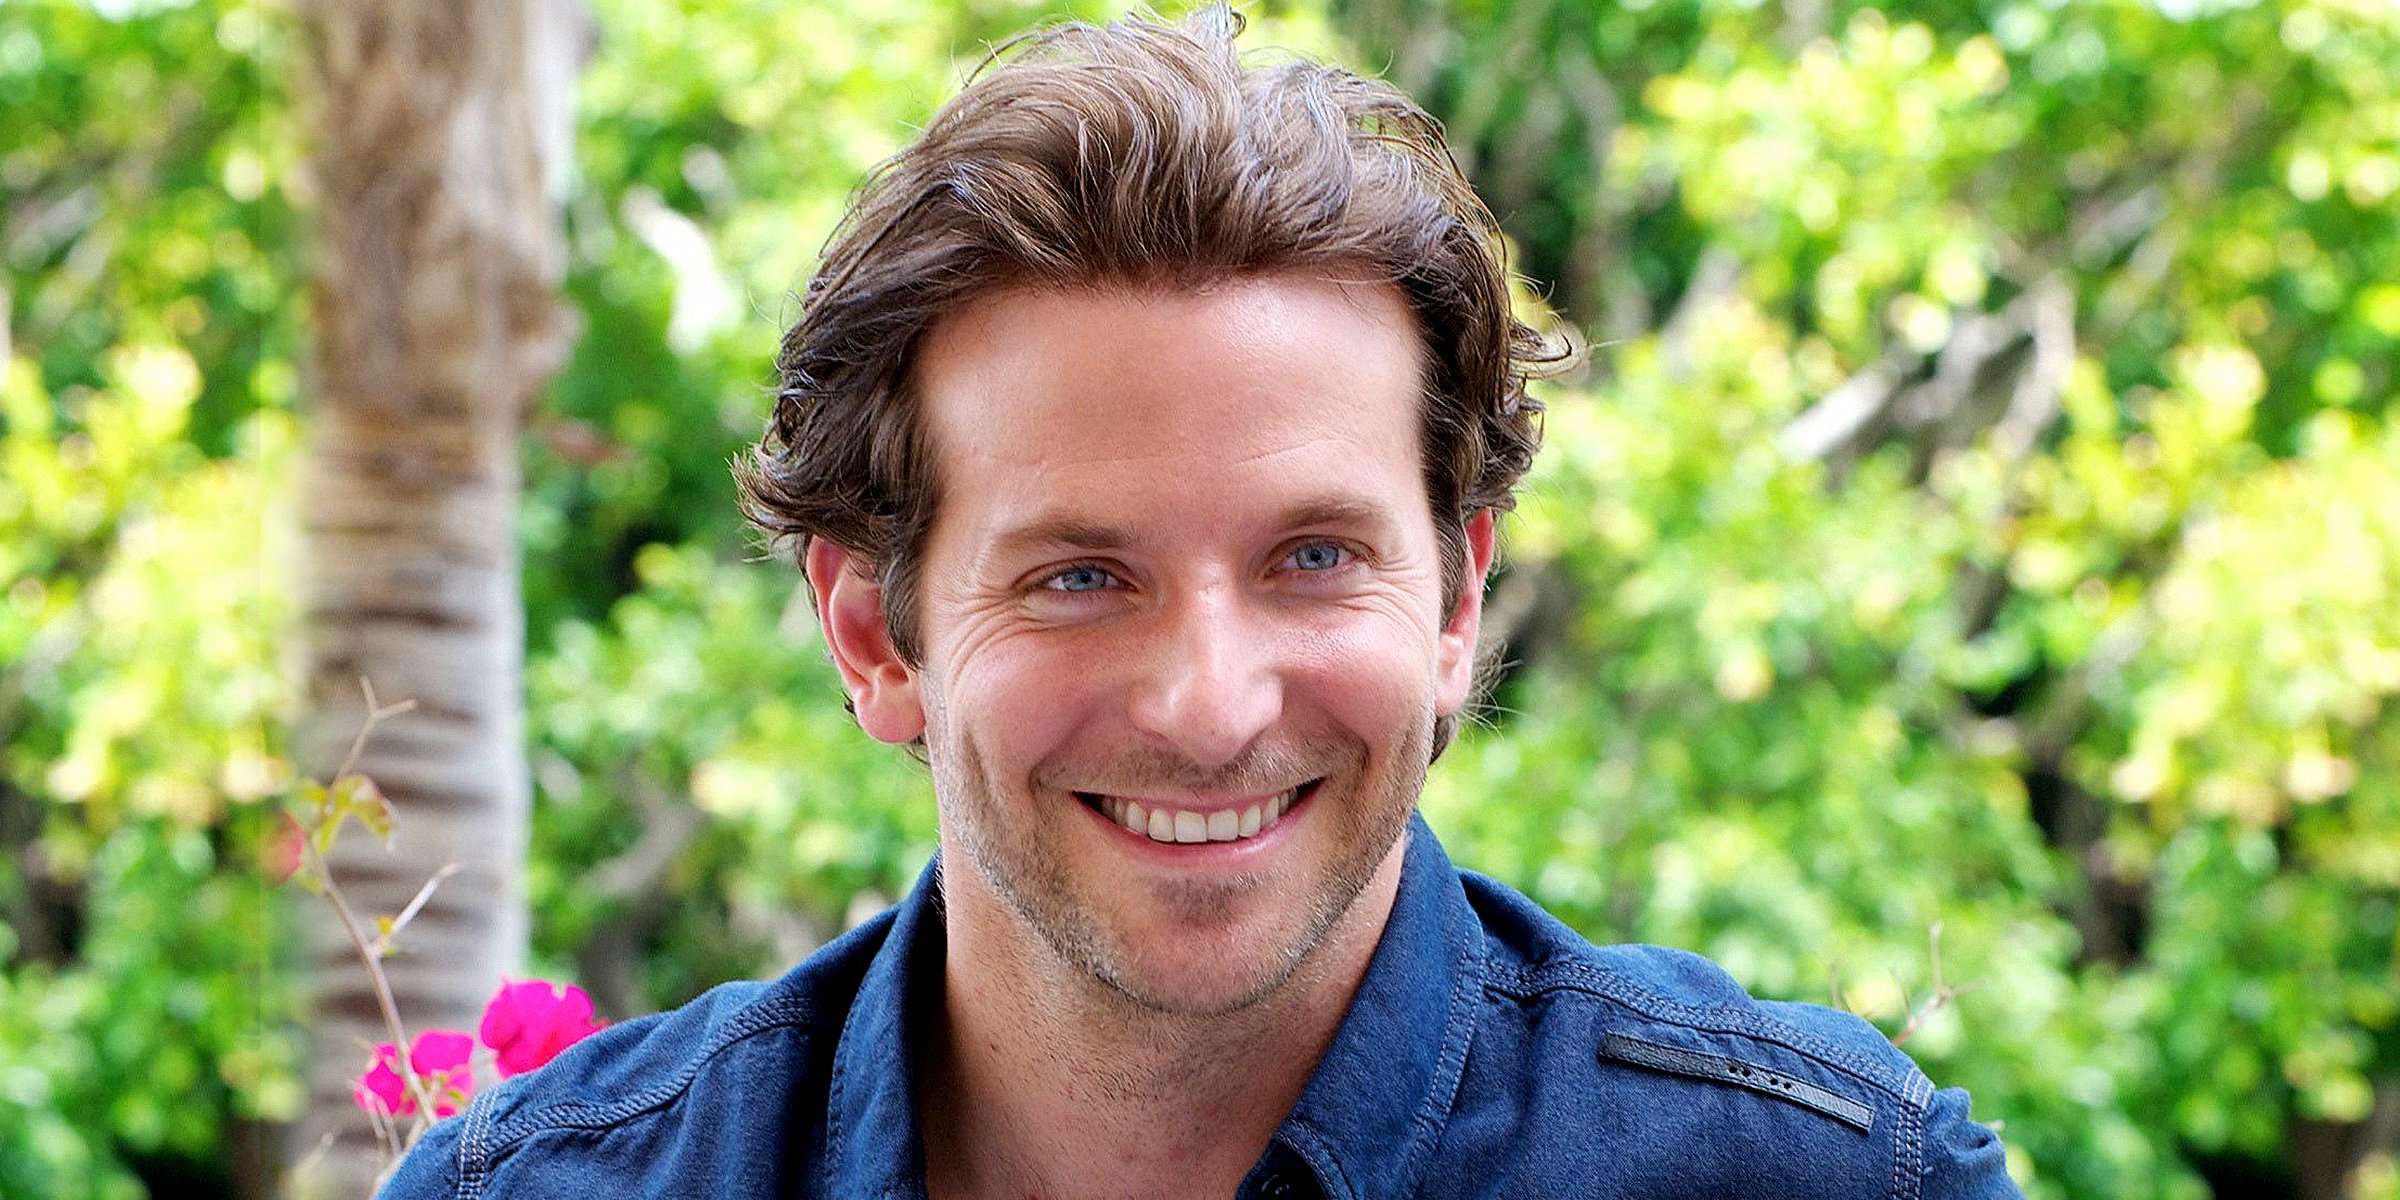 Bradley Cooper | Source: Getty Images